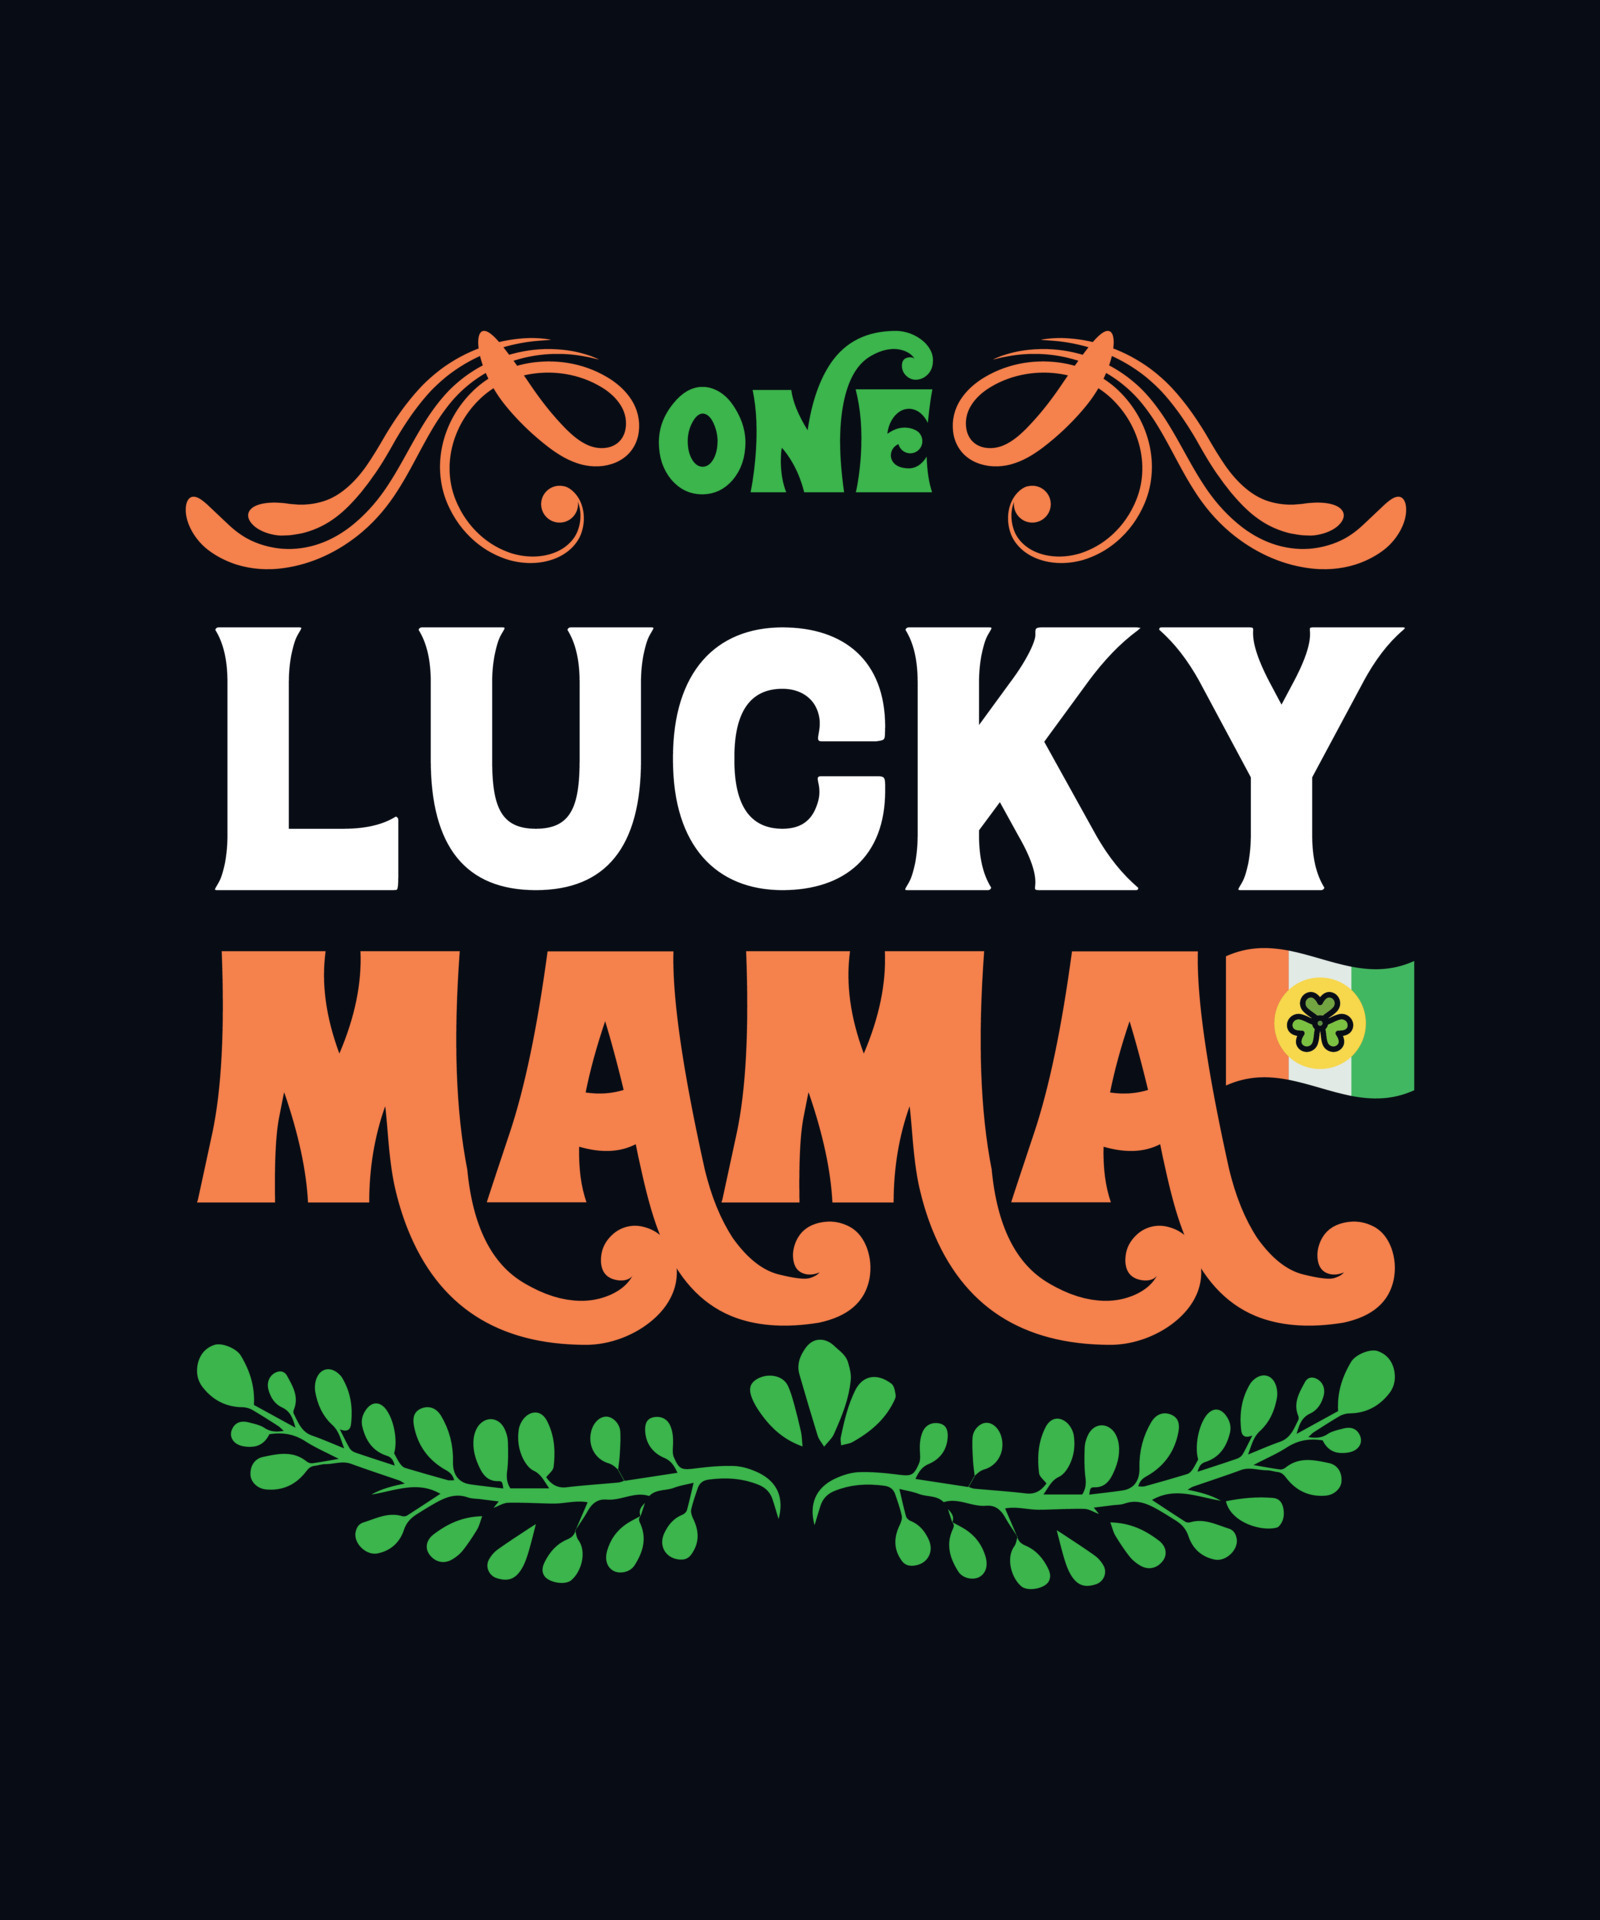 One lucky mama on the white background. Vector - Stock Illustration  [72938520] - PIXTA